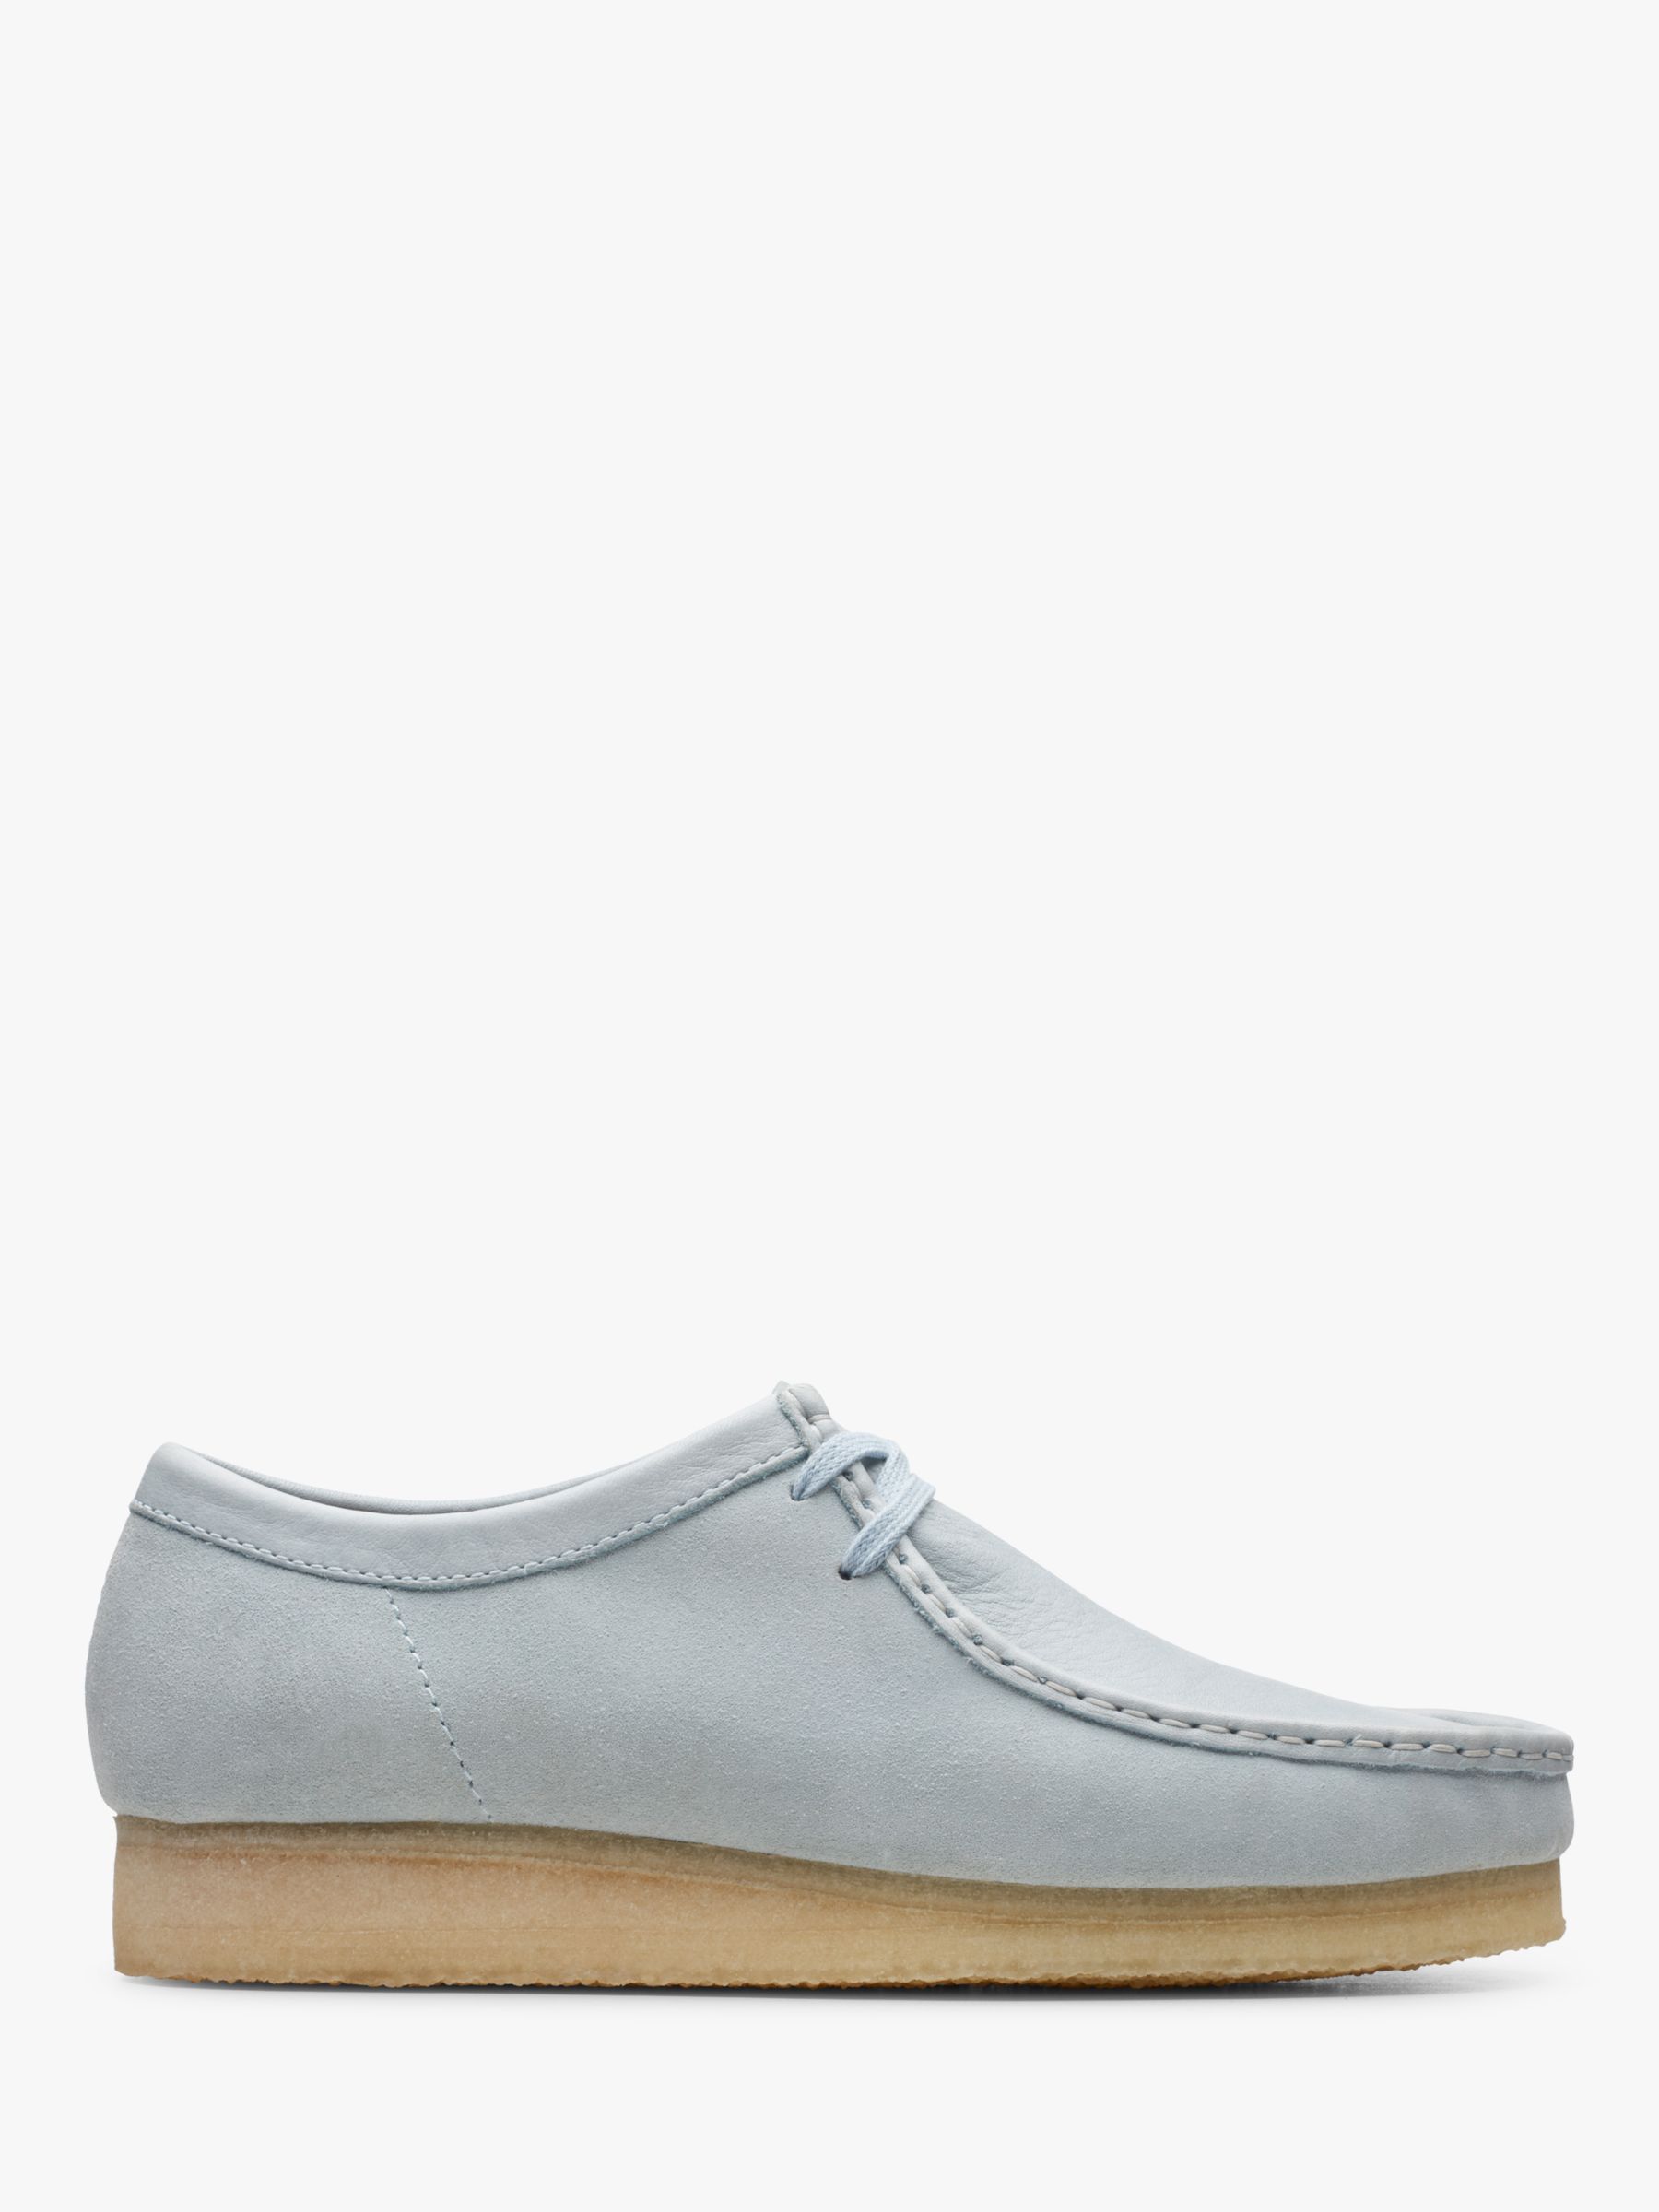 Clarks Suede Wallabee Shoes, Light Blue